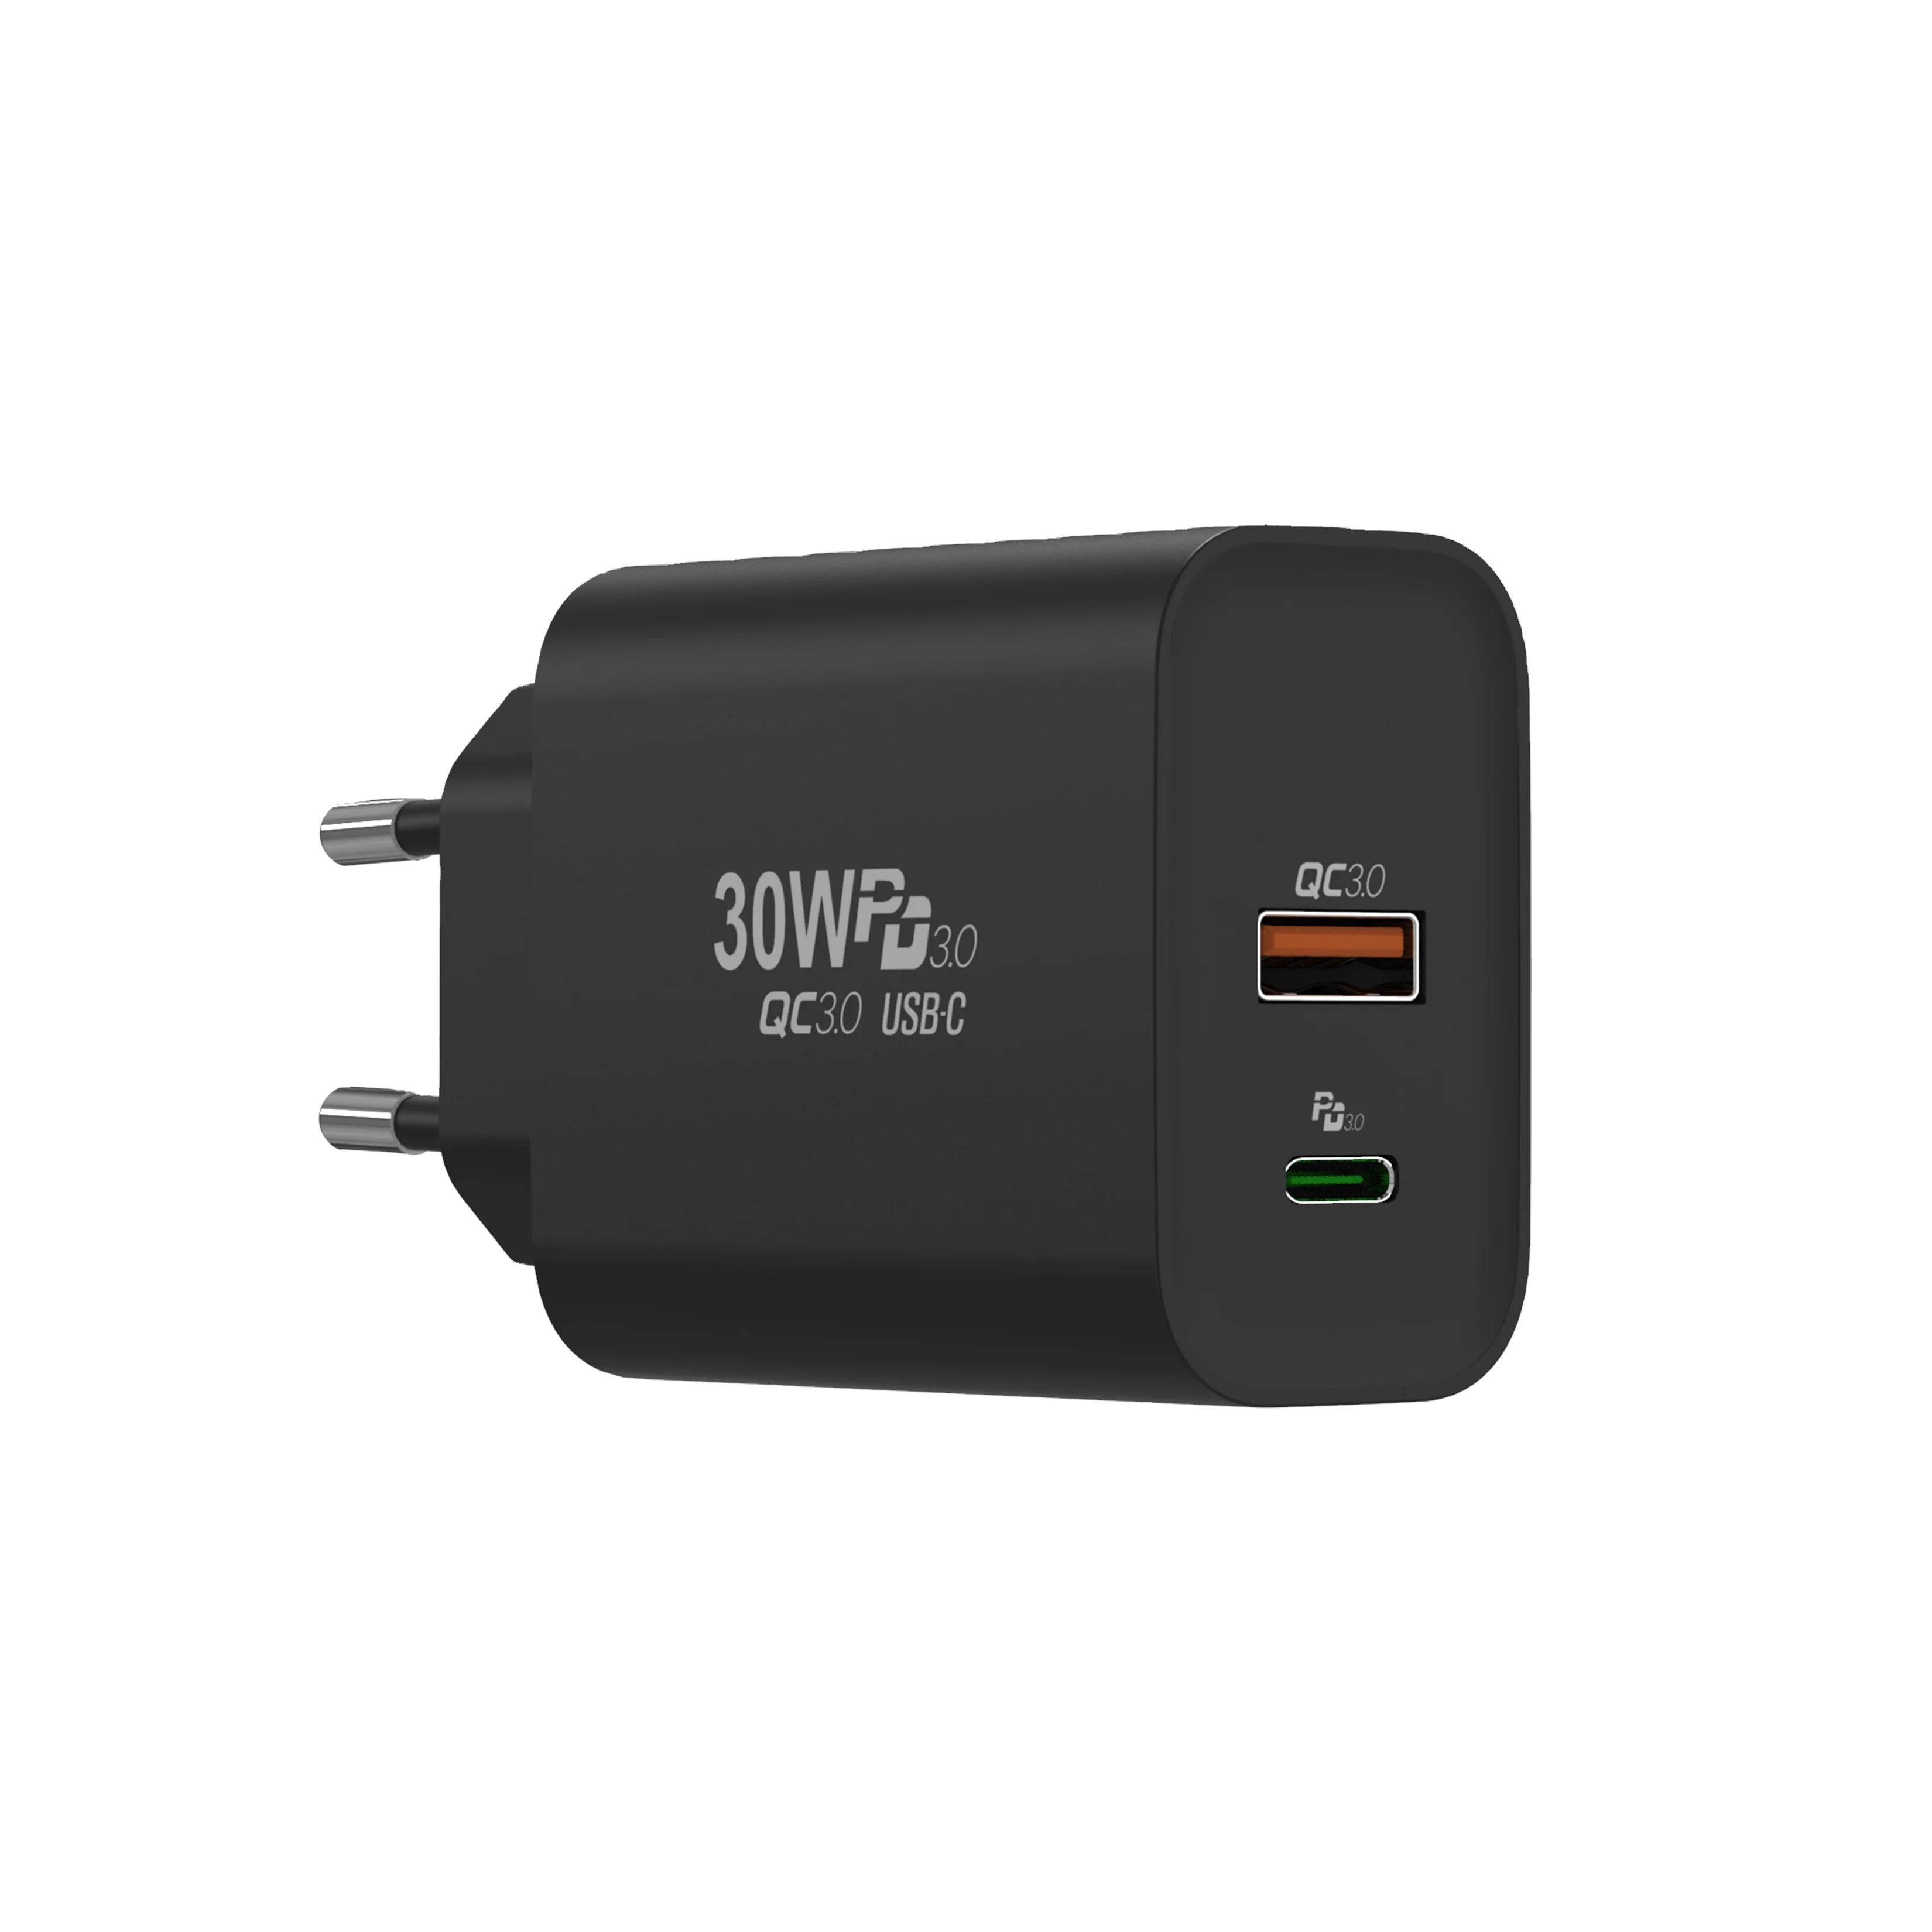 

US EU UK AU Plug PD USB QC 3.0 100-240V Support PPS 5V 3A Traveling Fast 30W USB Wall Charger For Cellphone